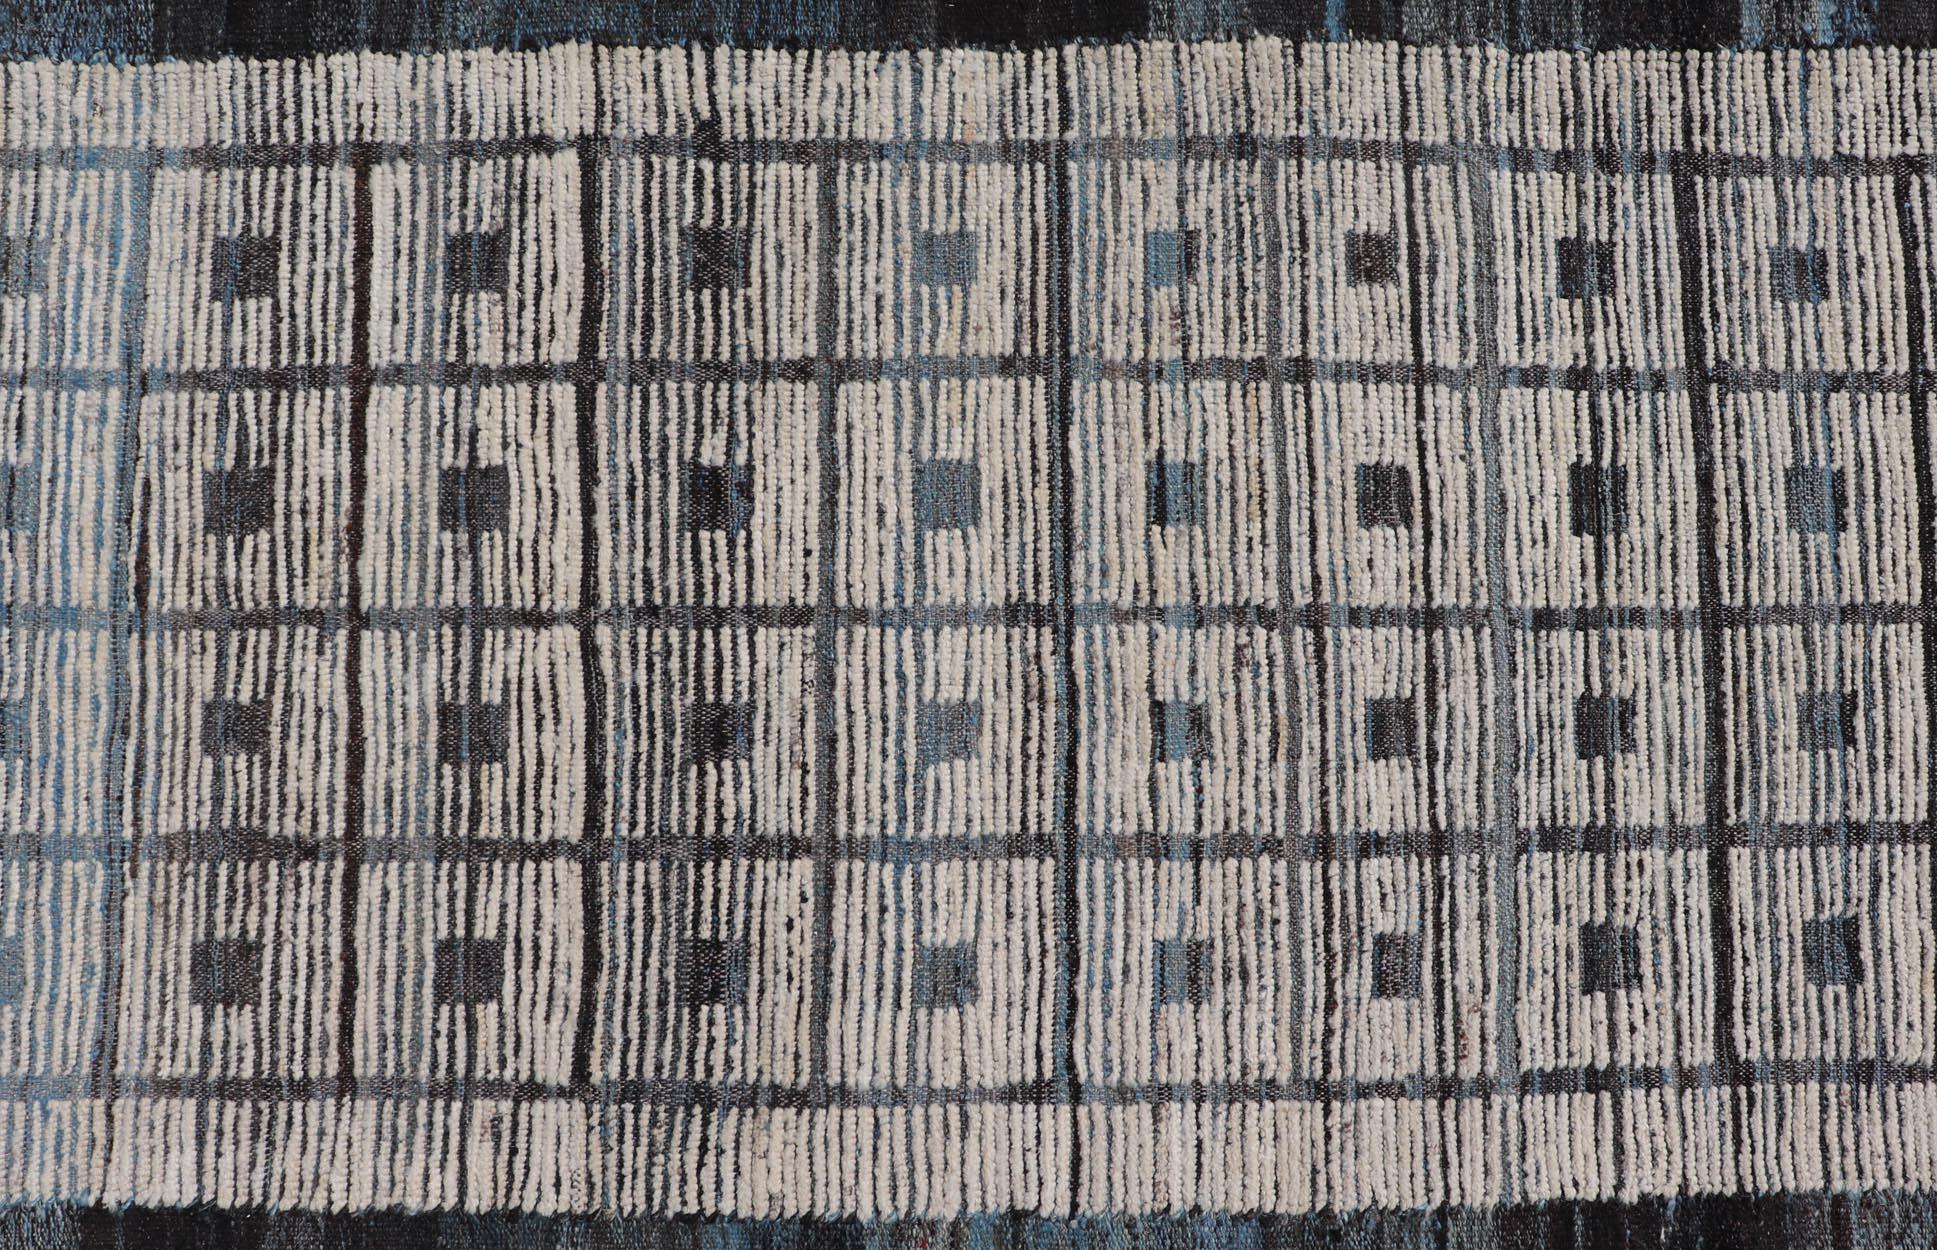 
Modern Casual Tribal Rug, Keivan Woven Arts / rug AFG-39515, country of origin / type: Afghanistan / Modern Casual, circa Early-21th Century.

Measures: 3'3 x 10'2.

This modern casual tribal rug has been hand-knotted. The rug features a modern